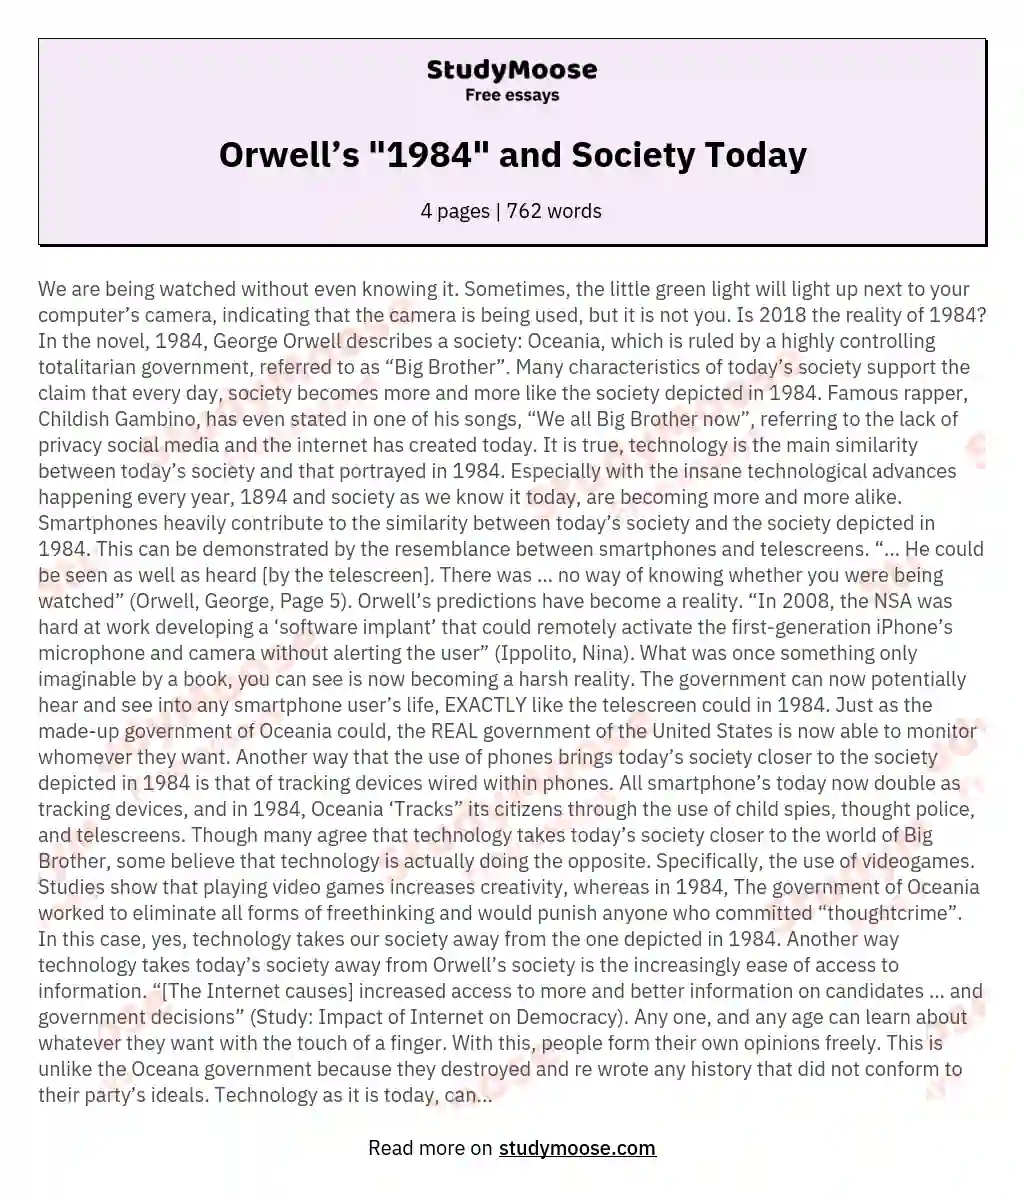 Orwell’s "1984" and Society Today essay